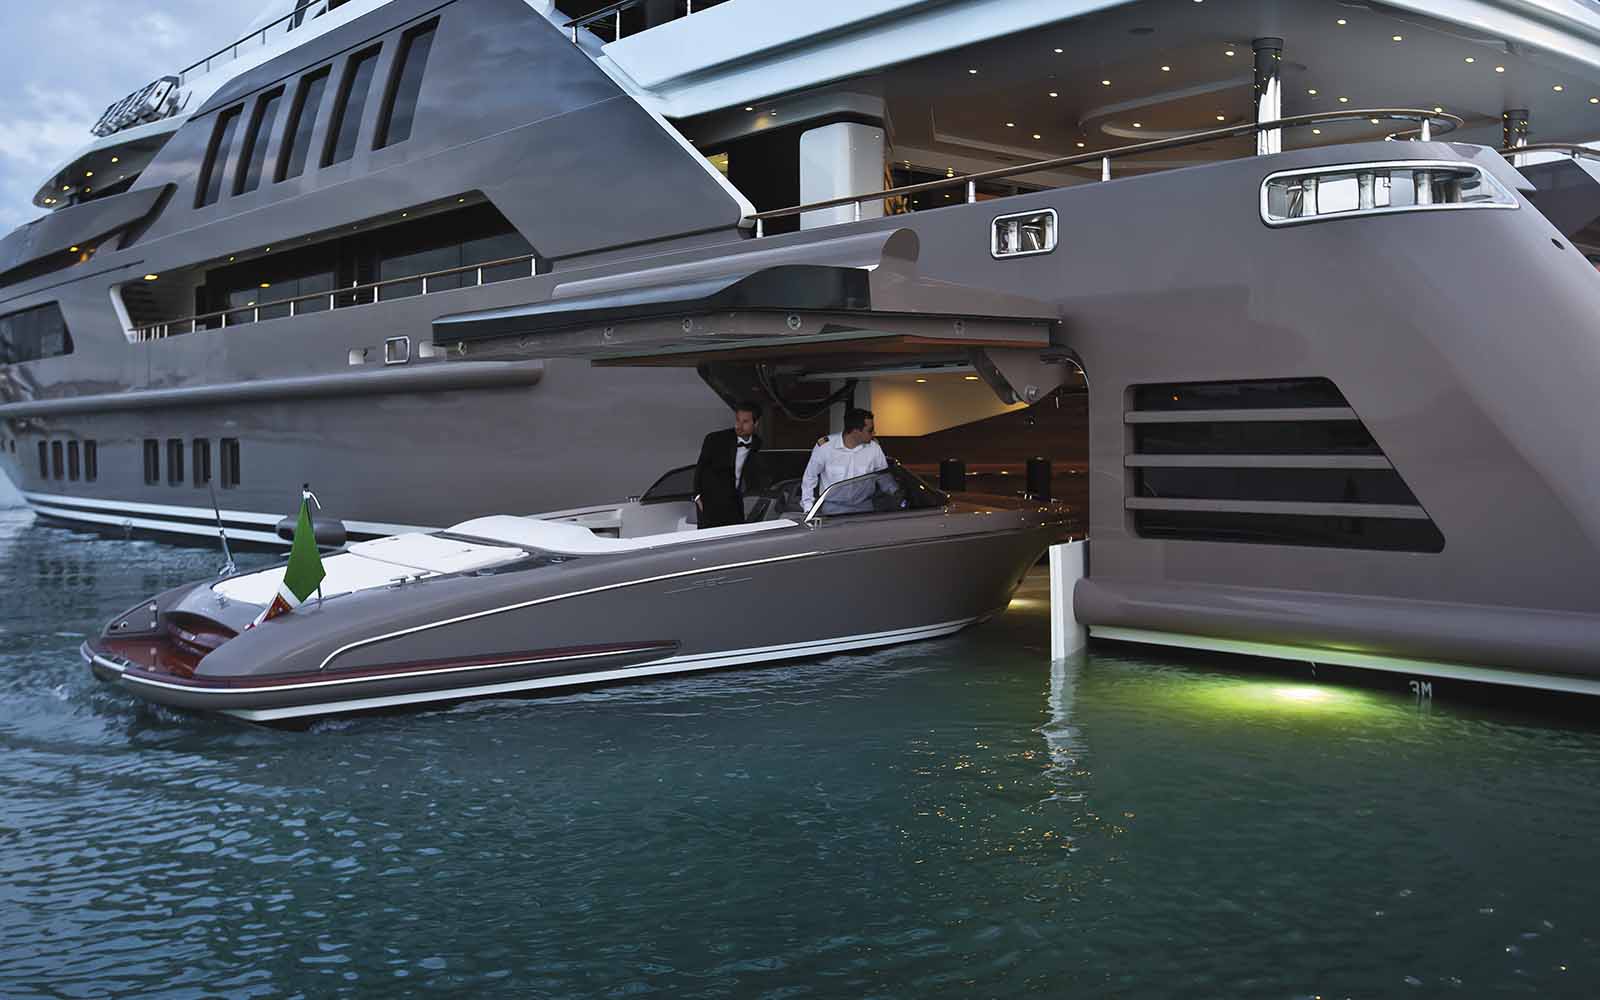 superiate j'ade crn yacht - boat shopping